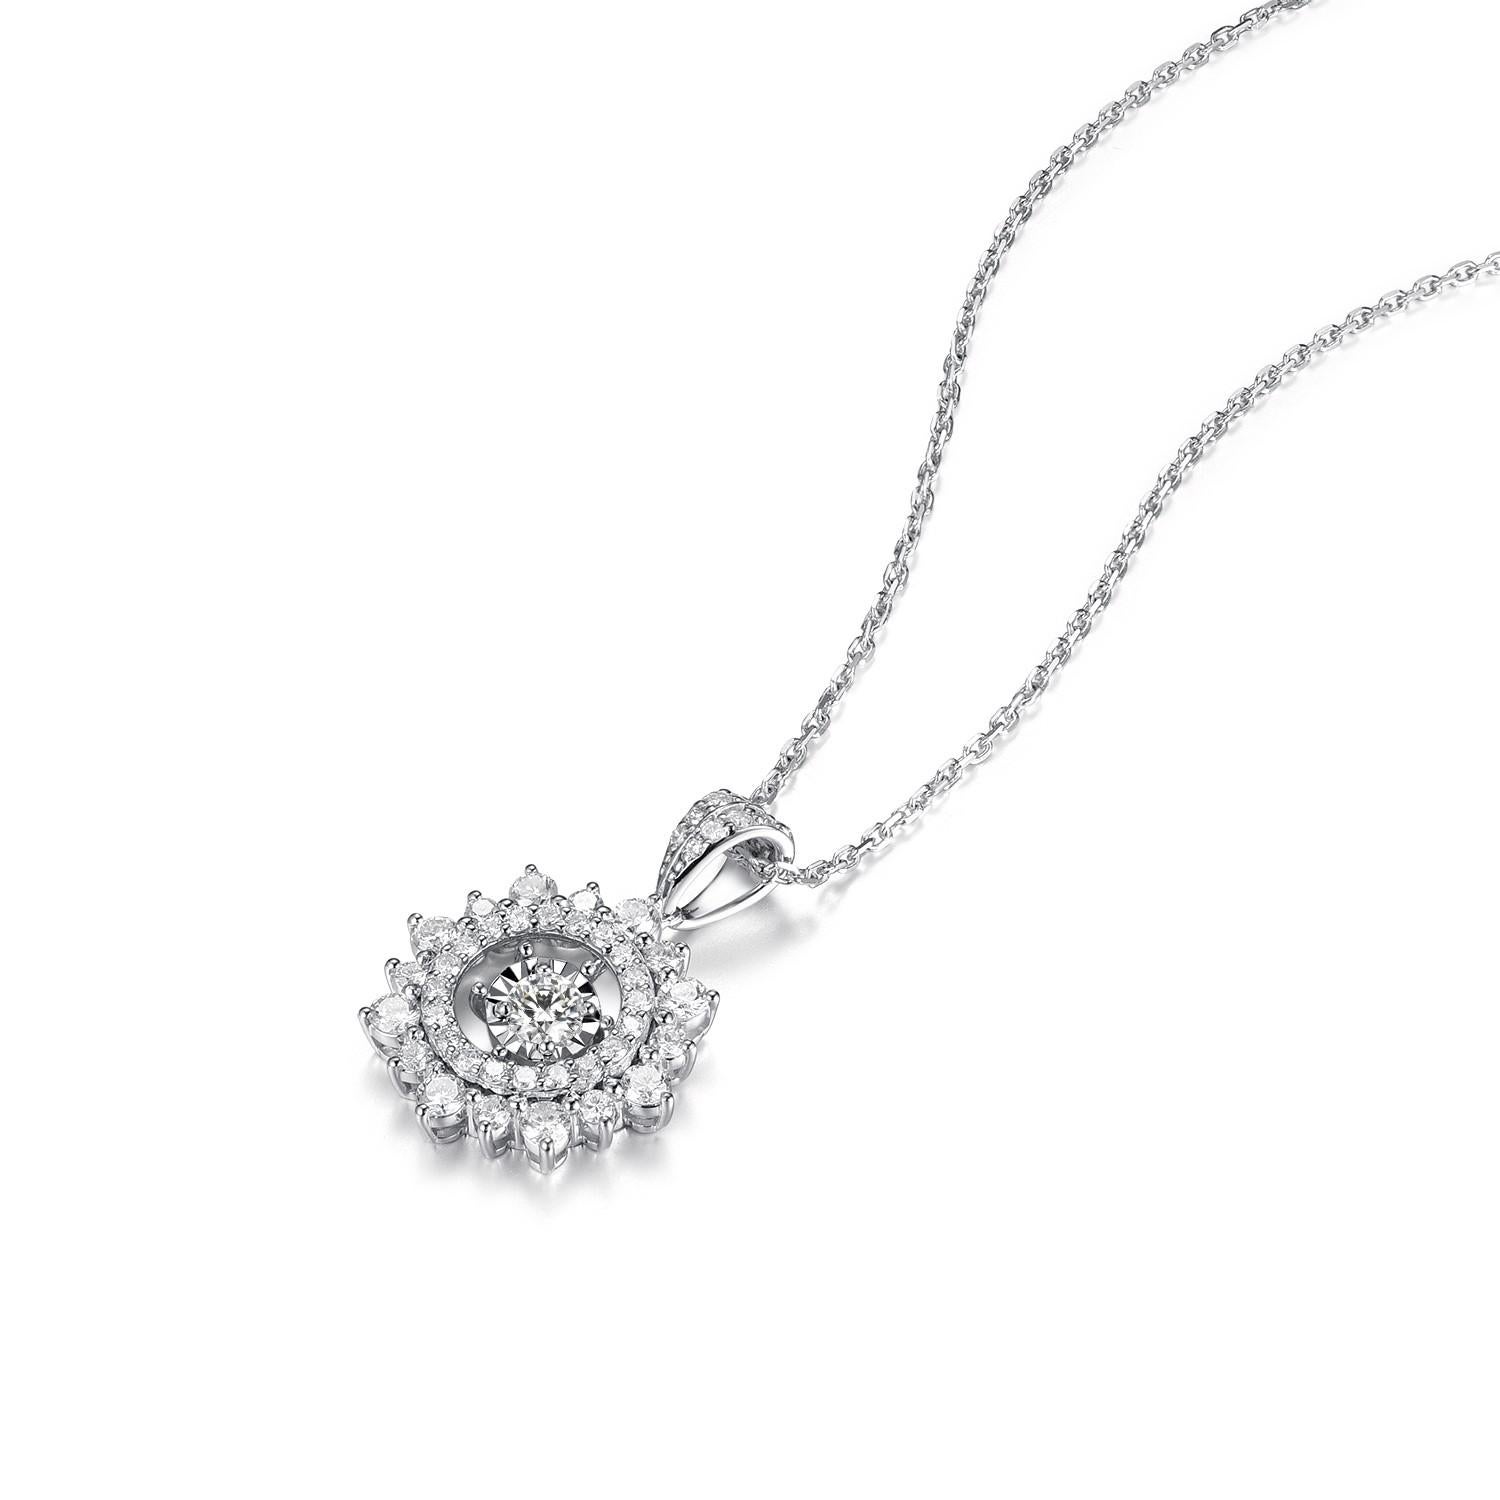 This necklace features 0.11 carat center diamond and 0.52 carat outside round diamond. Necklace is set in 18 karat white gold. The chain length is 17 inch.

Chain 17 inch pendant diameter:13mm
Main Diamond 0.11 carat   
Round Cut Diamonds 0.52